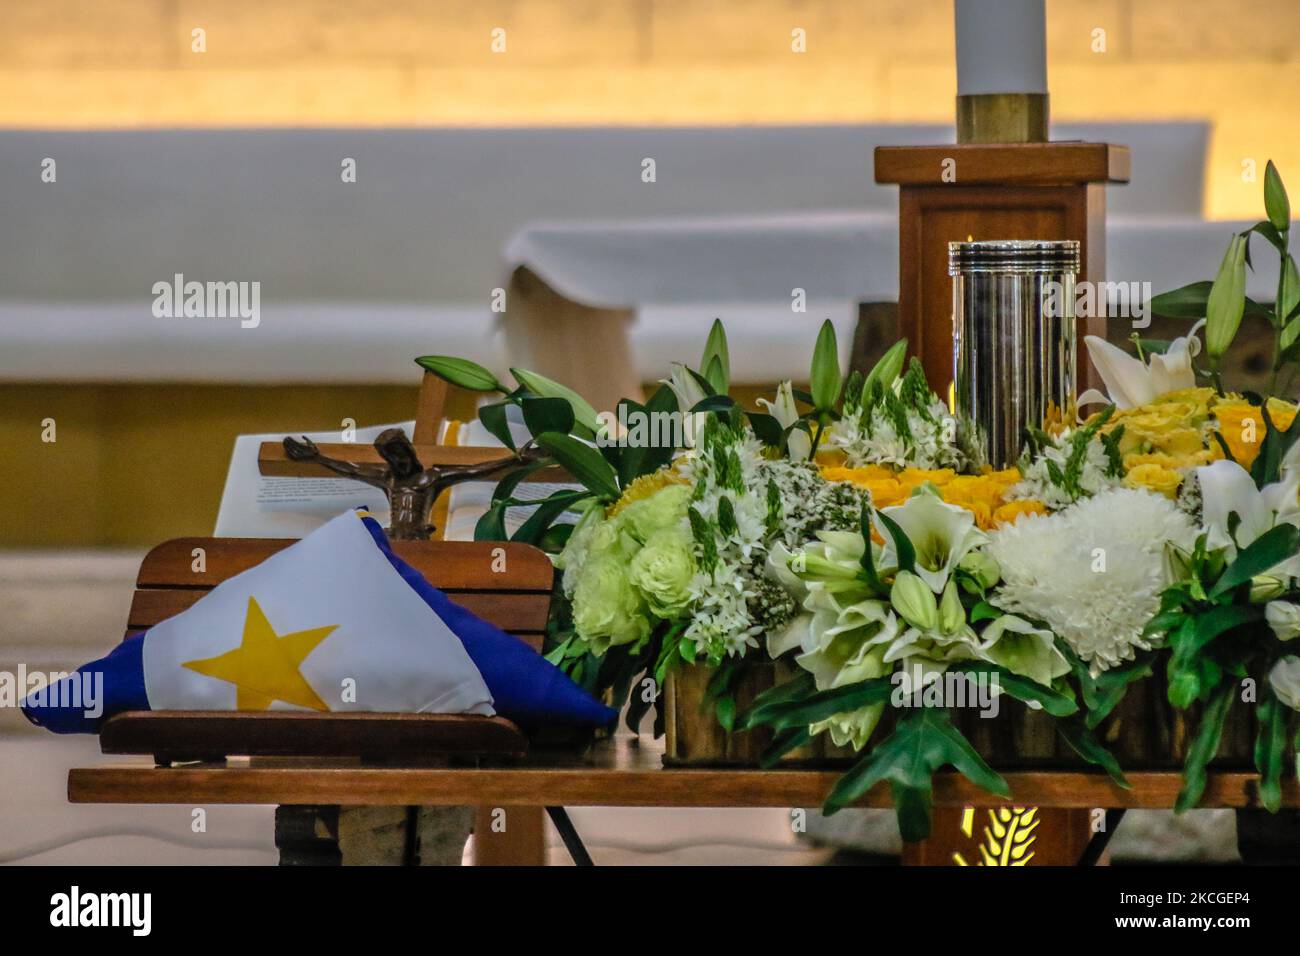 Ashes of Former Philippine President Benigno 'Noynoy' Aquino III are brought to Ateneo De Manila University in Quezon City, Philippines for public viewing on June 25, 2021. Former President Benigno Aquino III publicly known as PNoy, peacefully died last Thursday morning, June 24, 2021 at the age of 61 because of Renal Disease. (Photo by Ryan Eduard Benaid/NurPhoto) Stock Photo